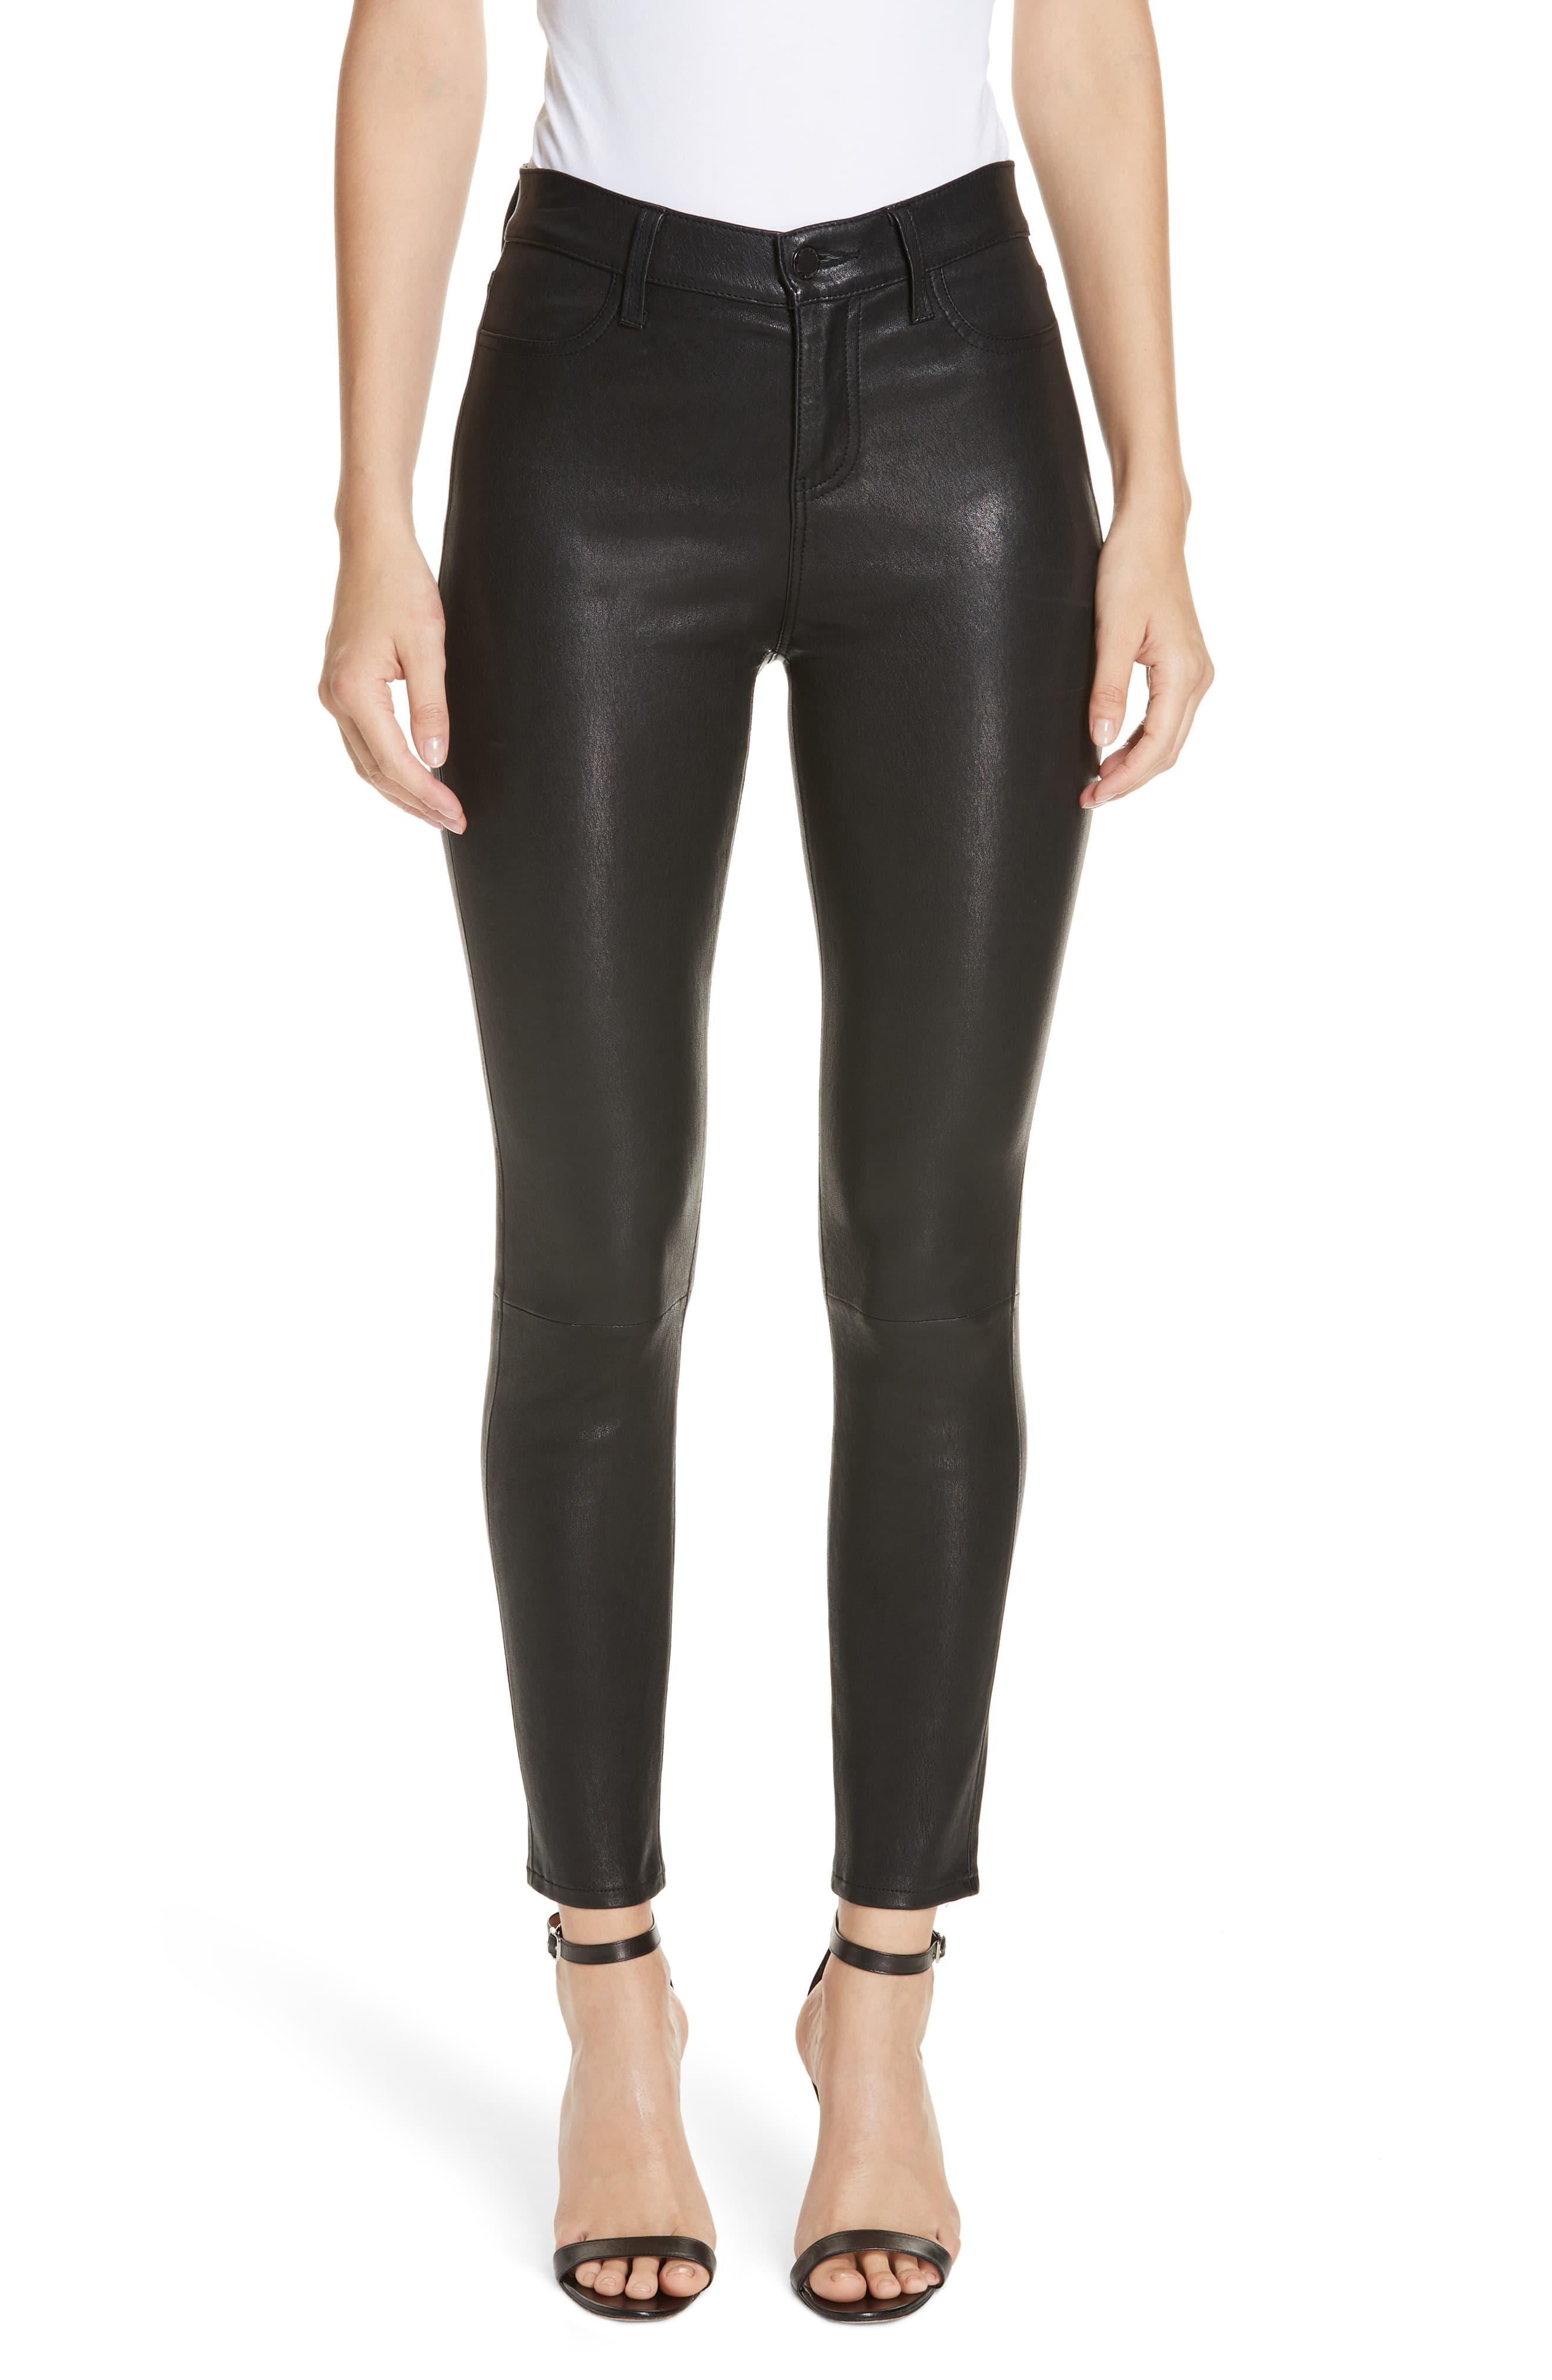 L'Agence Adelaide High Waist Crop Leather Jeans in Black - Lyst